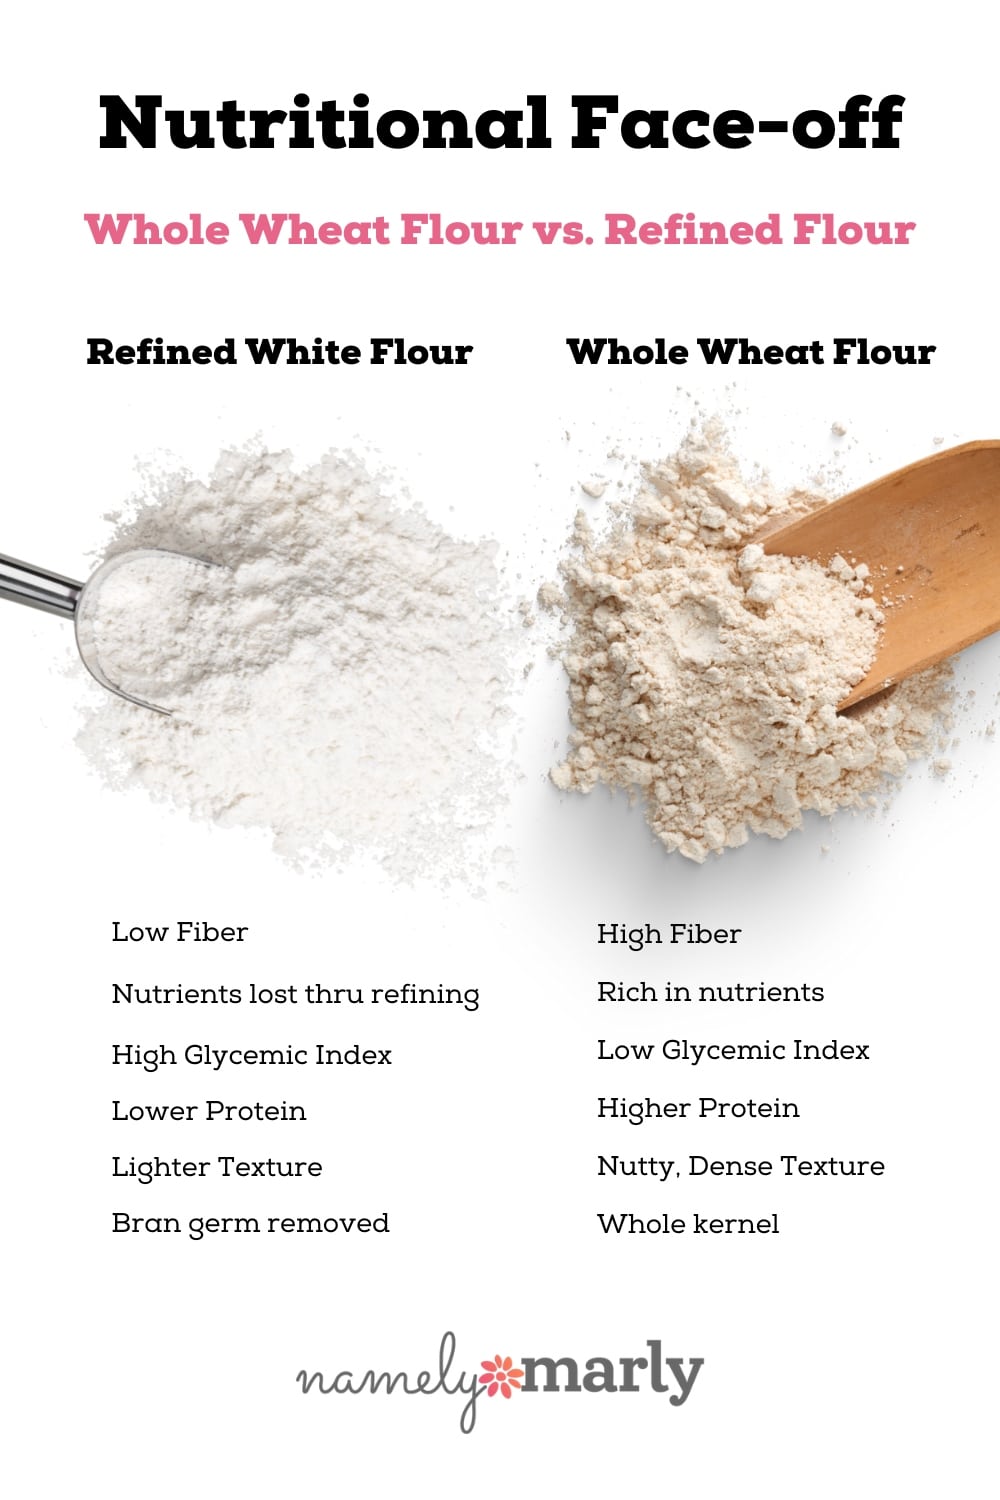 Graphic depicting a Nutritional Face-off between Whole Wheat Flour and Refined White Flour. Two scoops of flour are shown side by side, with Whole Wheat Flour on one side and White Flour on the other. The heading reads 'Nutritional Face-off: Whole Wheat Flour vs Refined White Flour.' Subheadings include 'Refined White Flour' with bullet points indicating low fiber, nutrients lost through refining, high glycemic index, lower protein, lighter texture, and bran germ removed. The other subheading reads 'Whole Wheat Flour' with bullet points indicating high fiber, rich in nutrients, low glycemic index, higher protein, nutty, dense texture, and whole kernel.